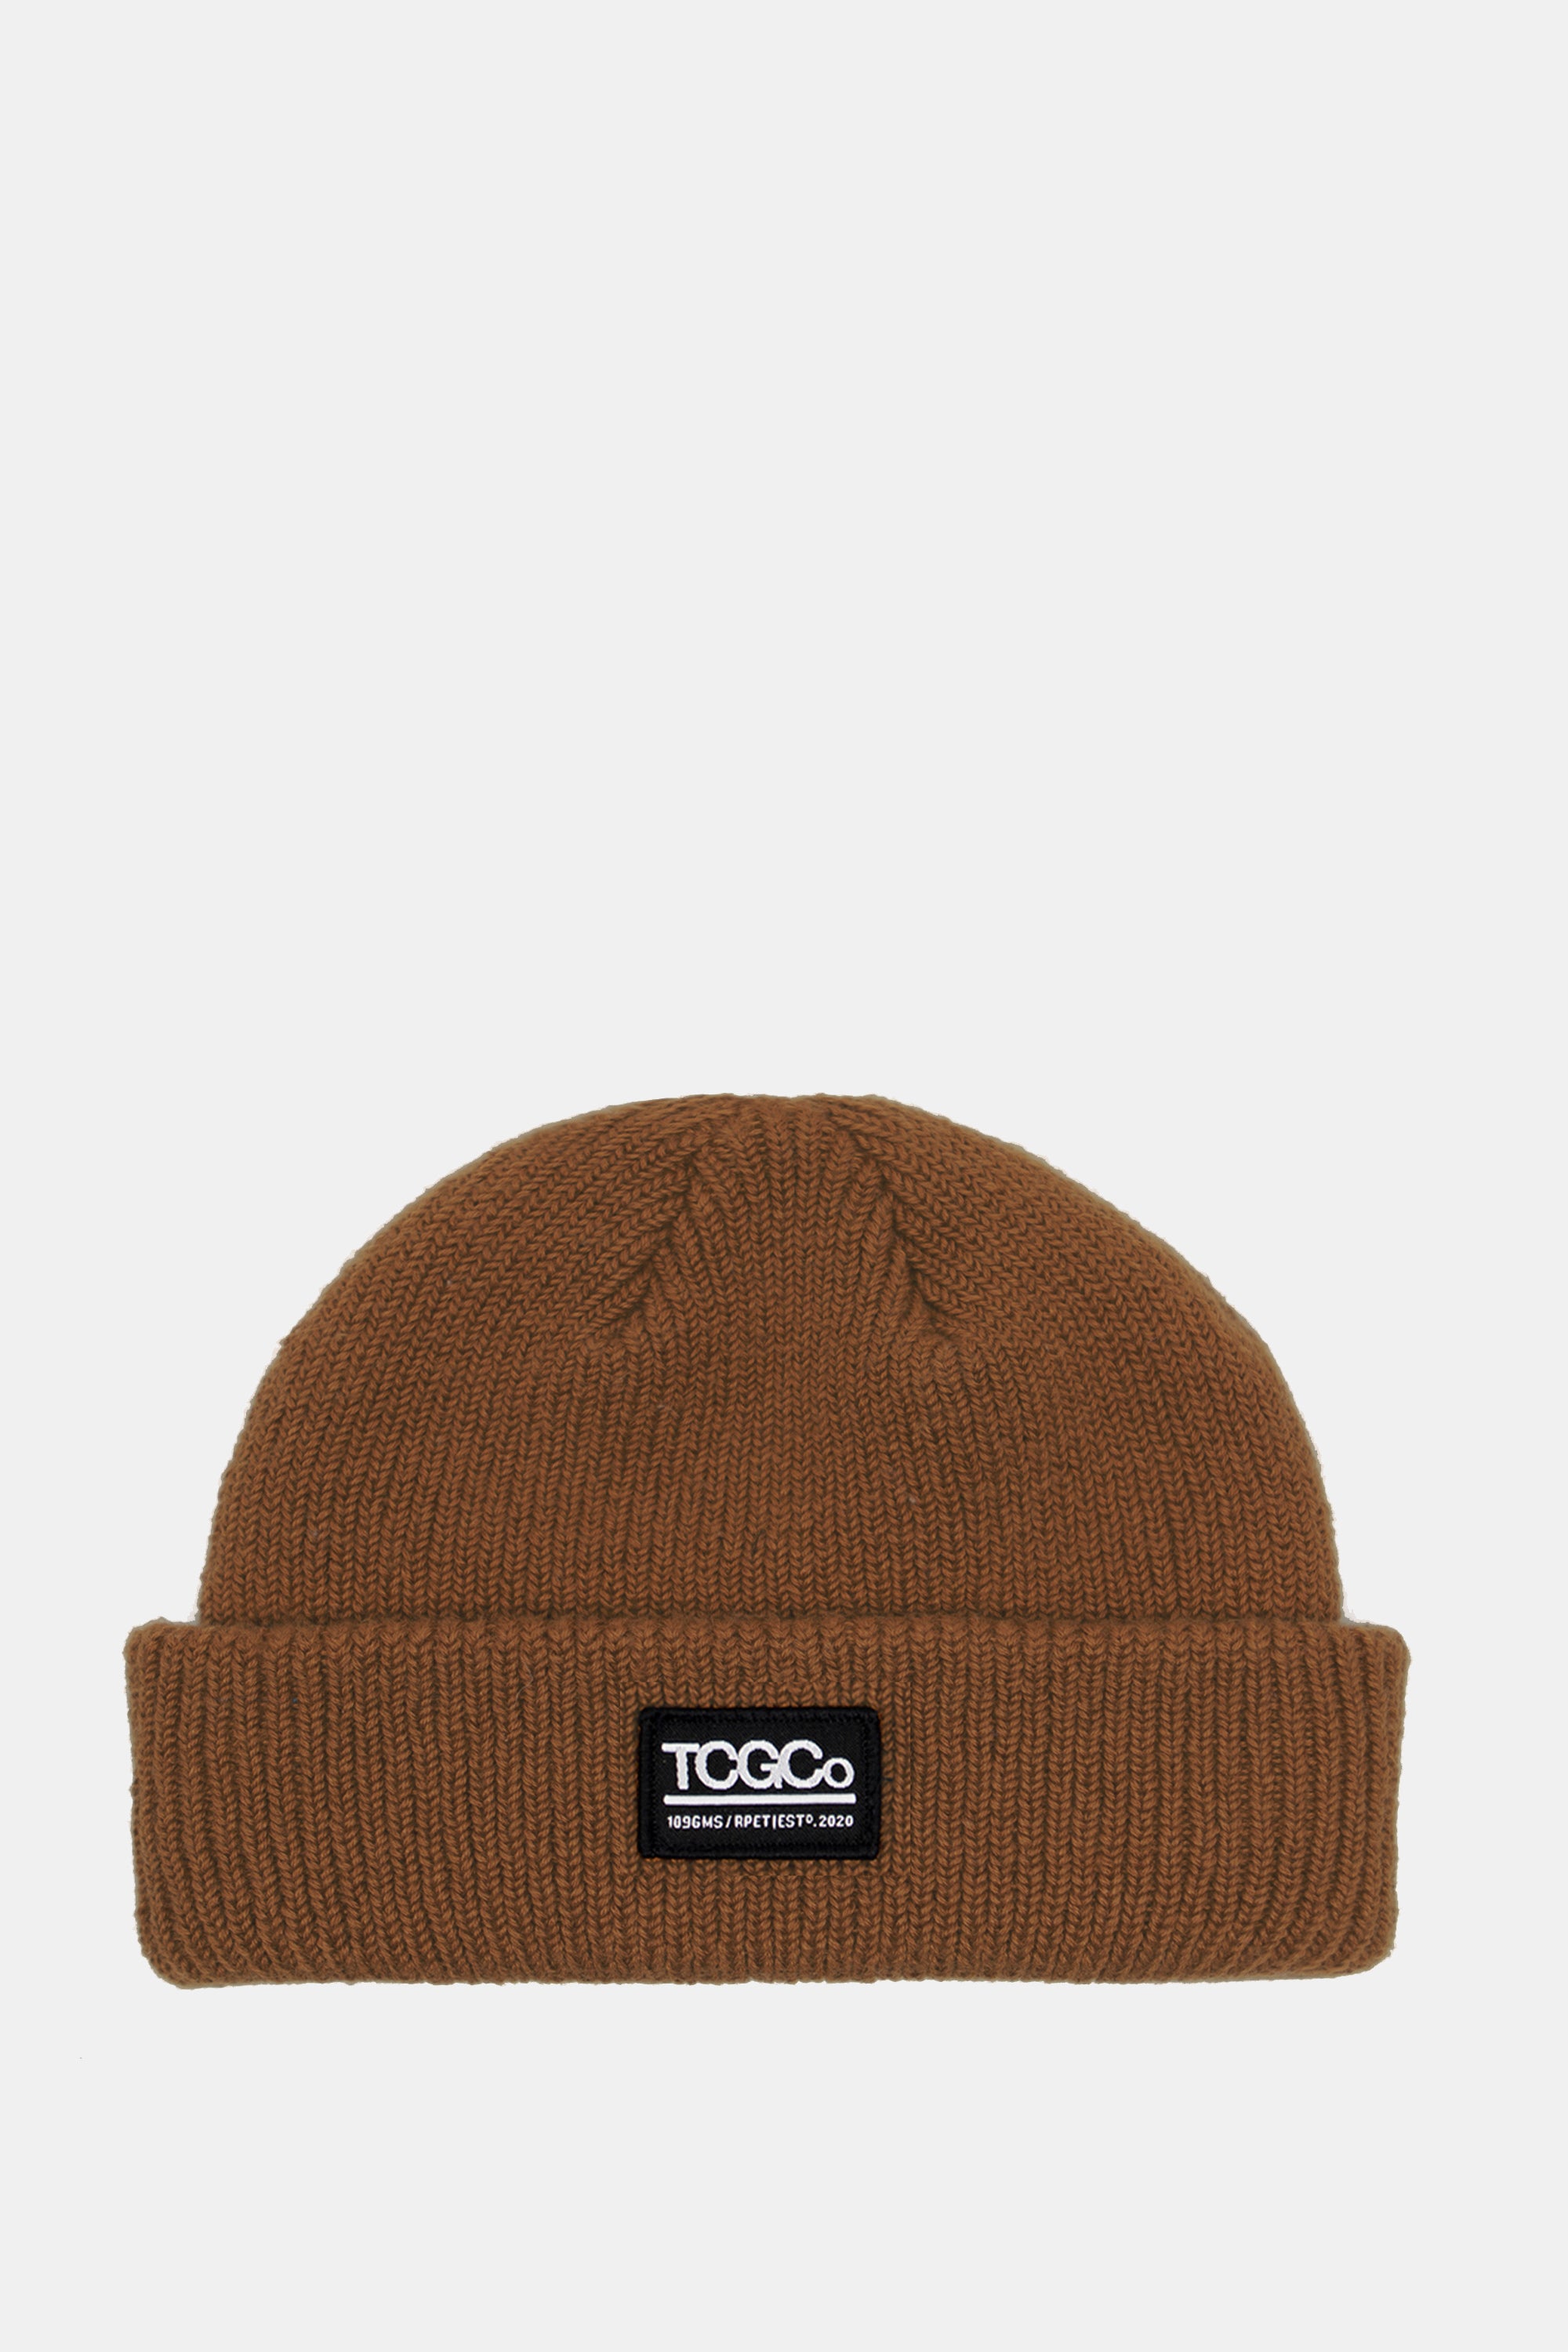 Rex - 100% Recycled Beanie Cocoa